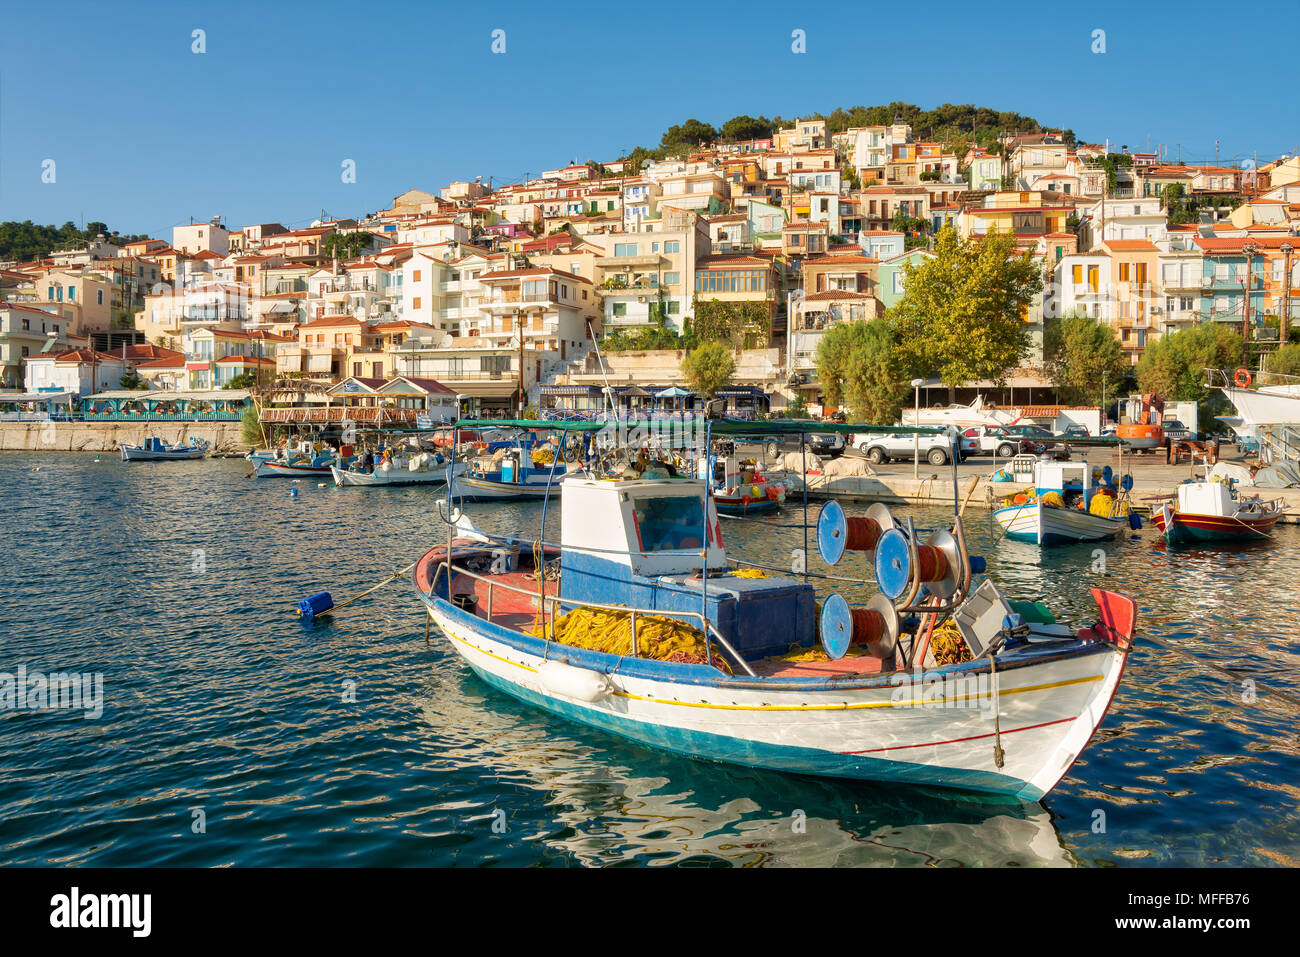 Panorama view of the picturesque port with traditional wooden fishing boats and the village Plomari in evening light, island Lesvos, Aegean Sea Greece Stock Photo